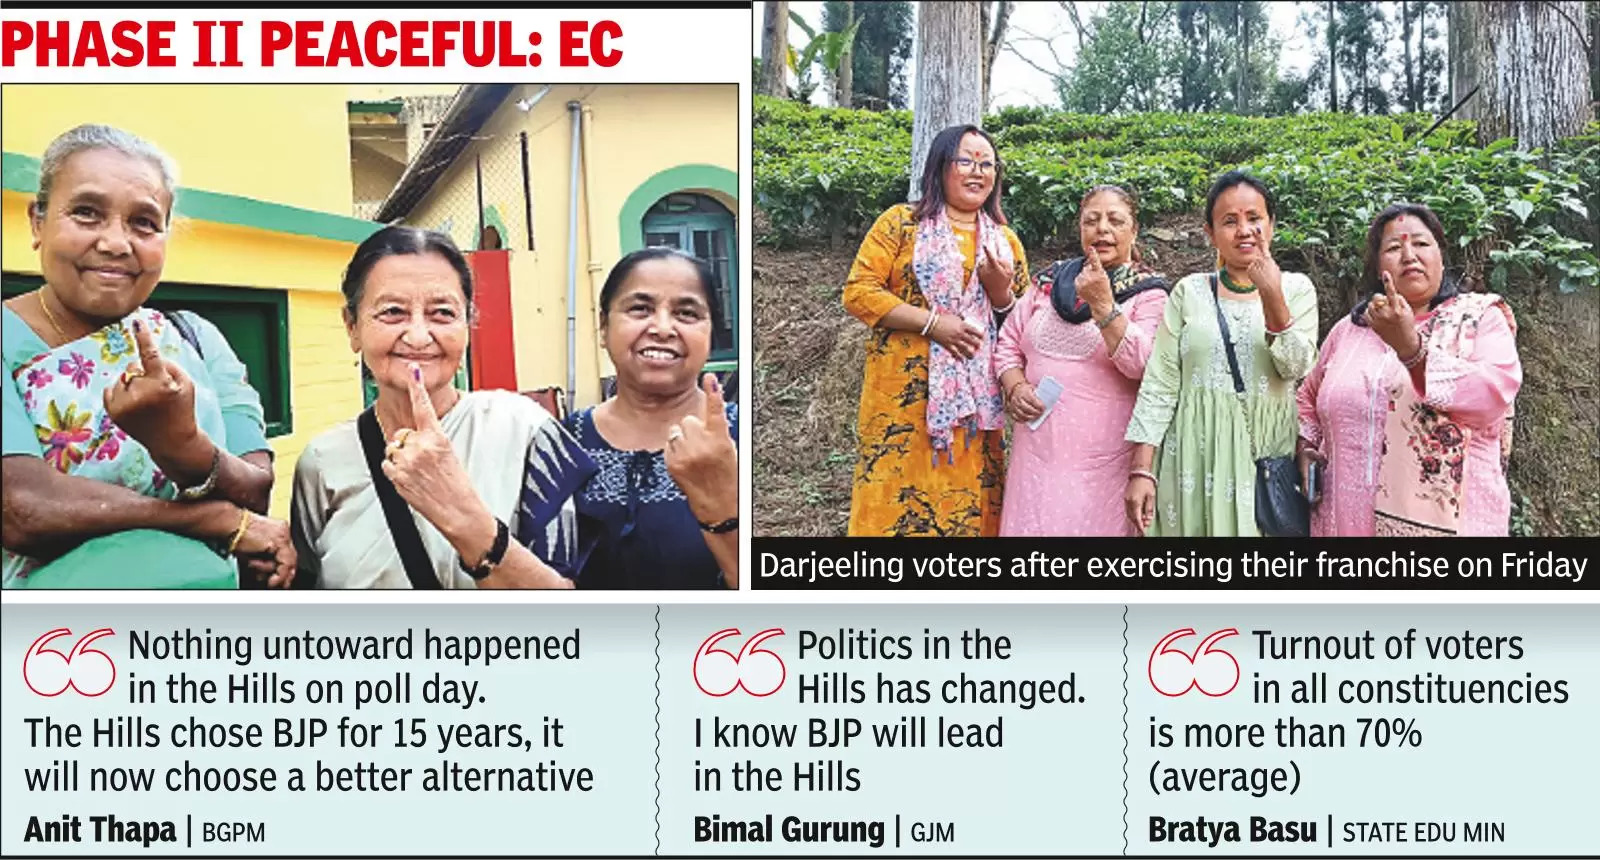 At 71.1%, voter turnout dips in three N Bengal seats over 2019 LS election